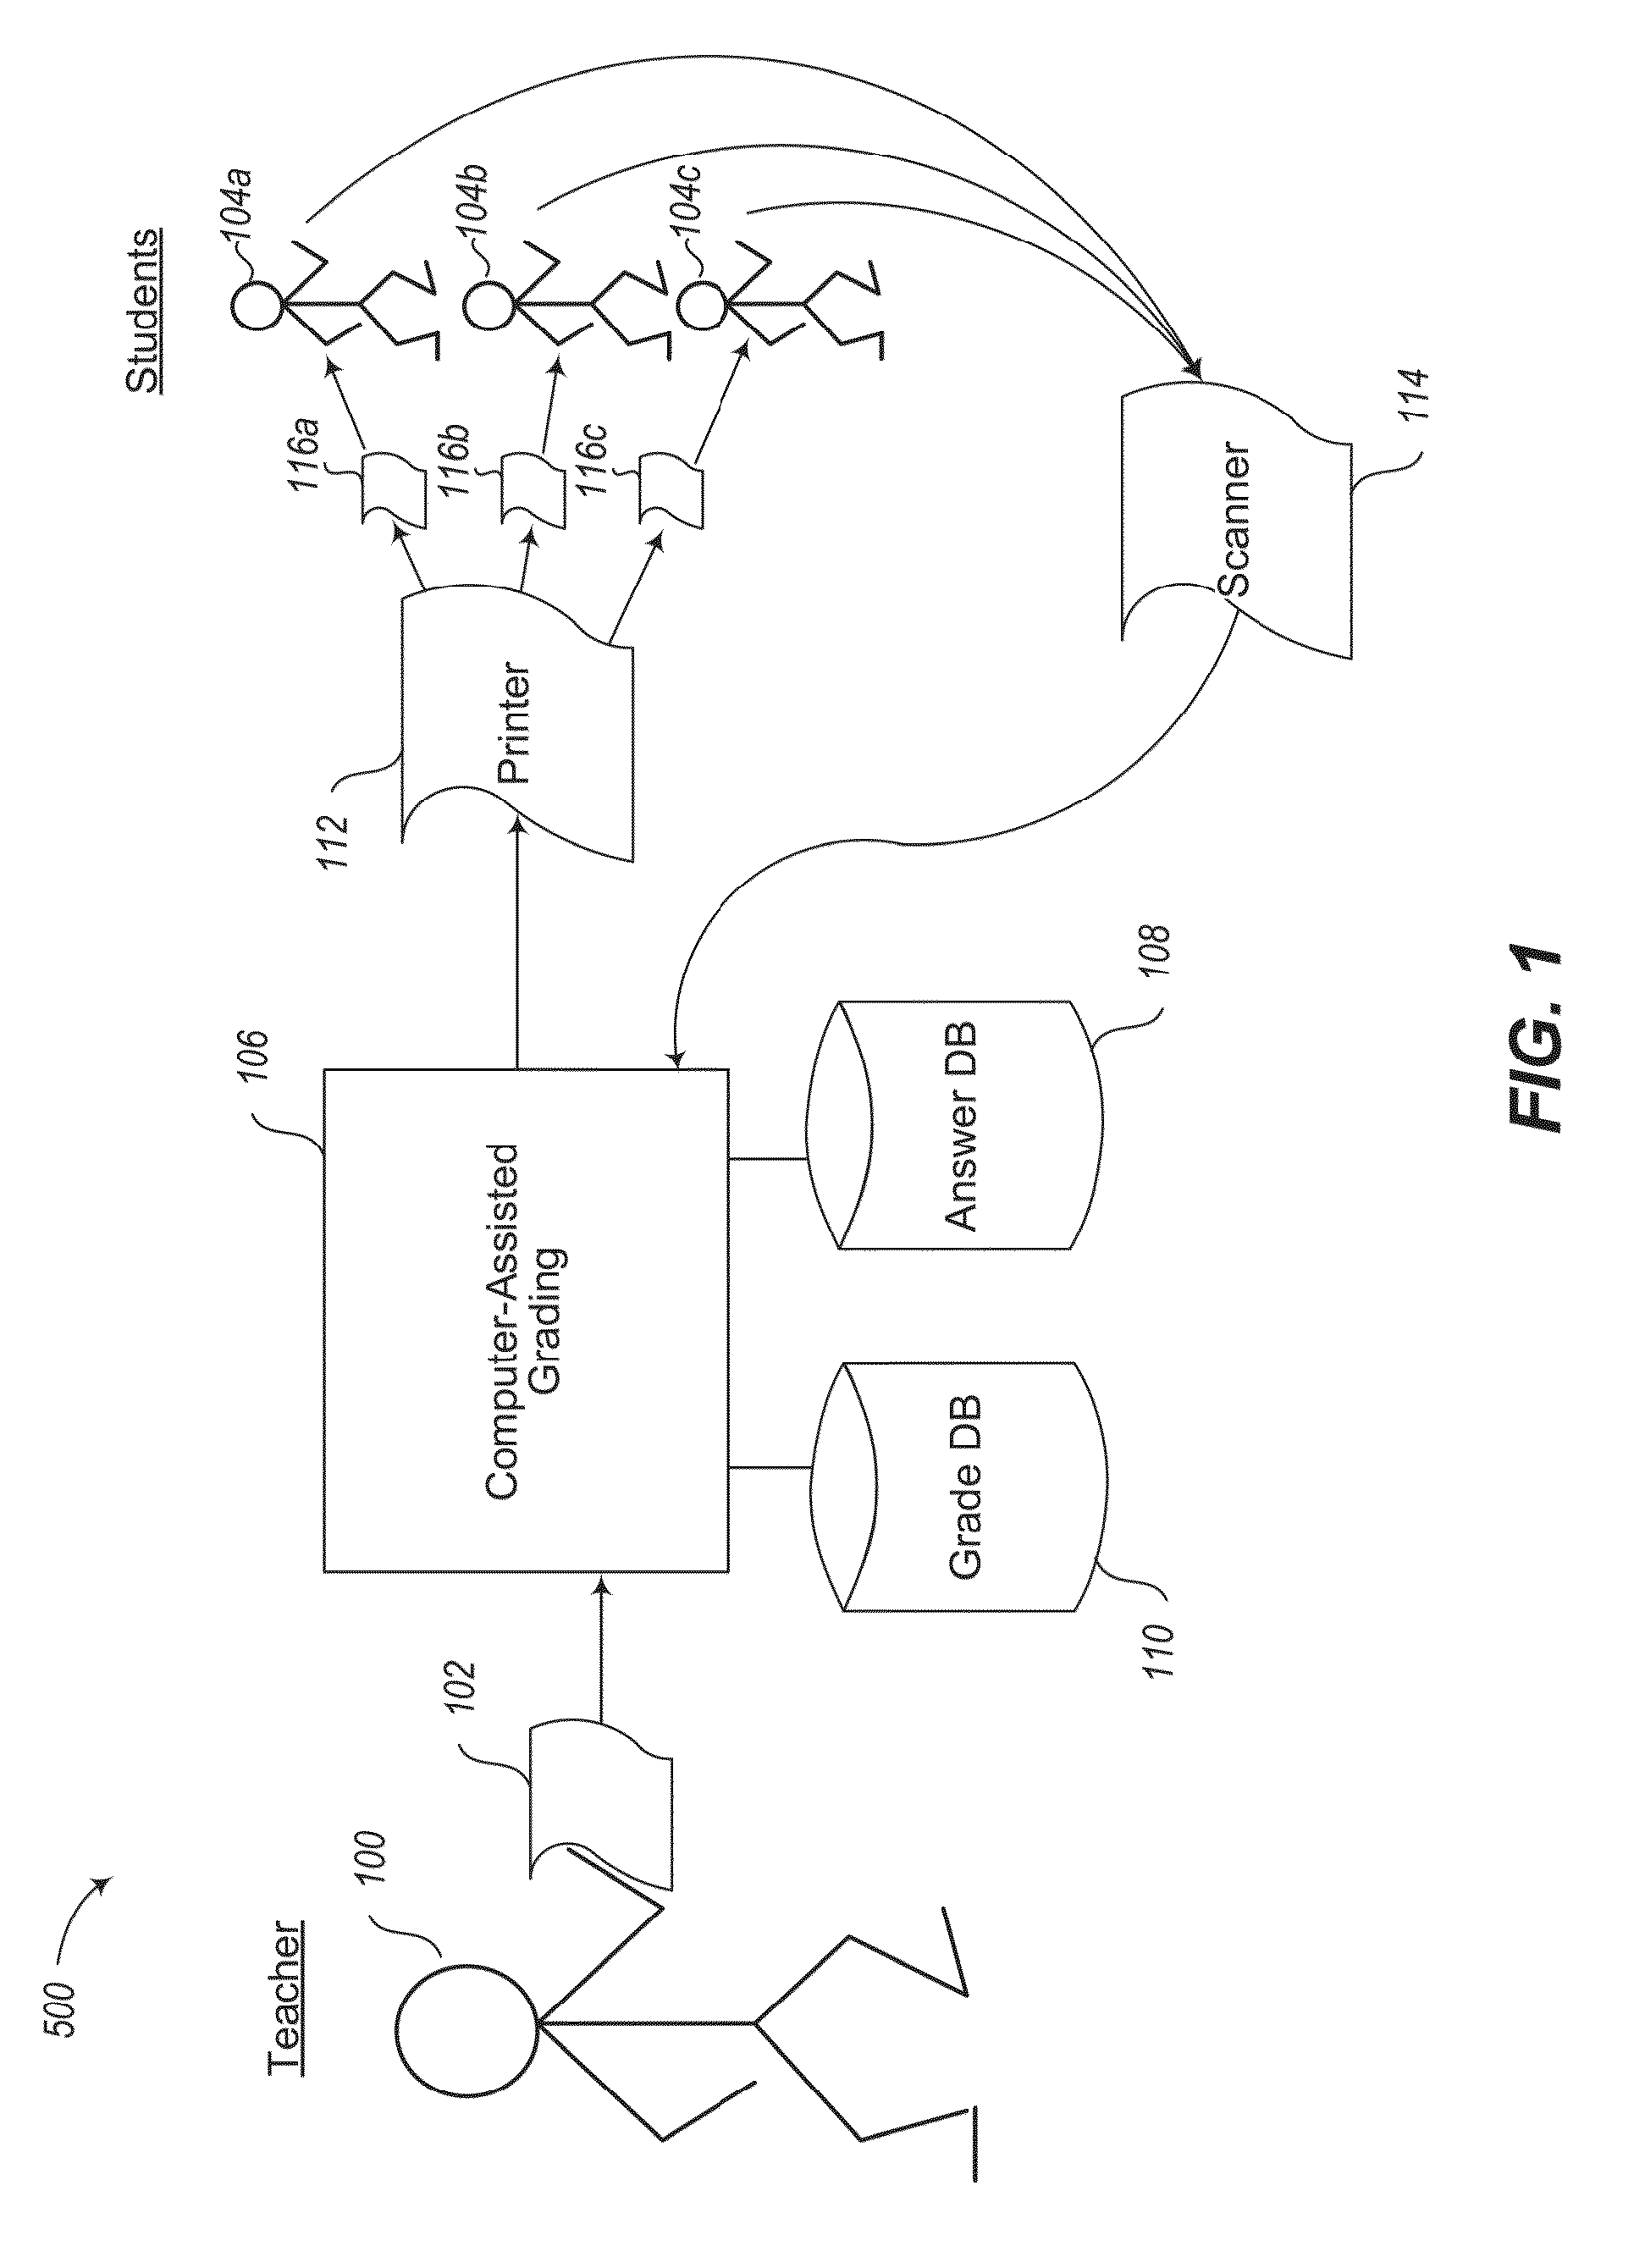 Systems and methods for computer-assisted grading of printed tests